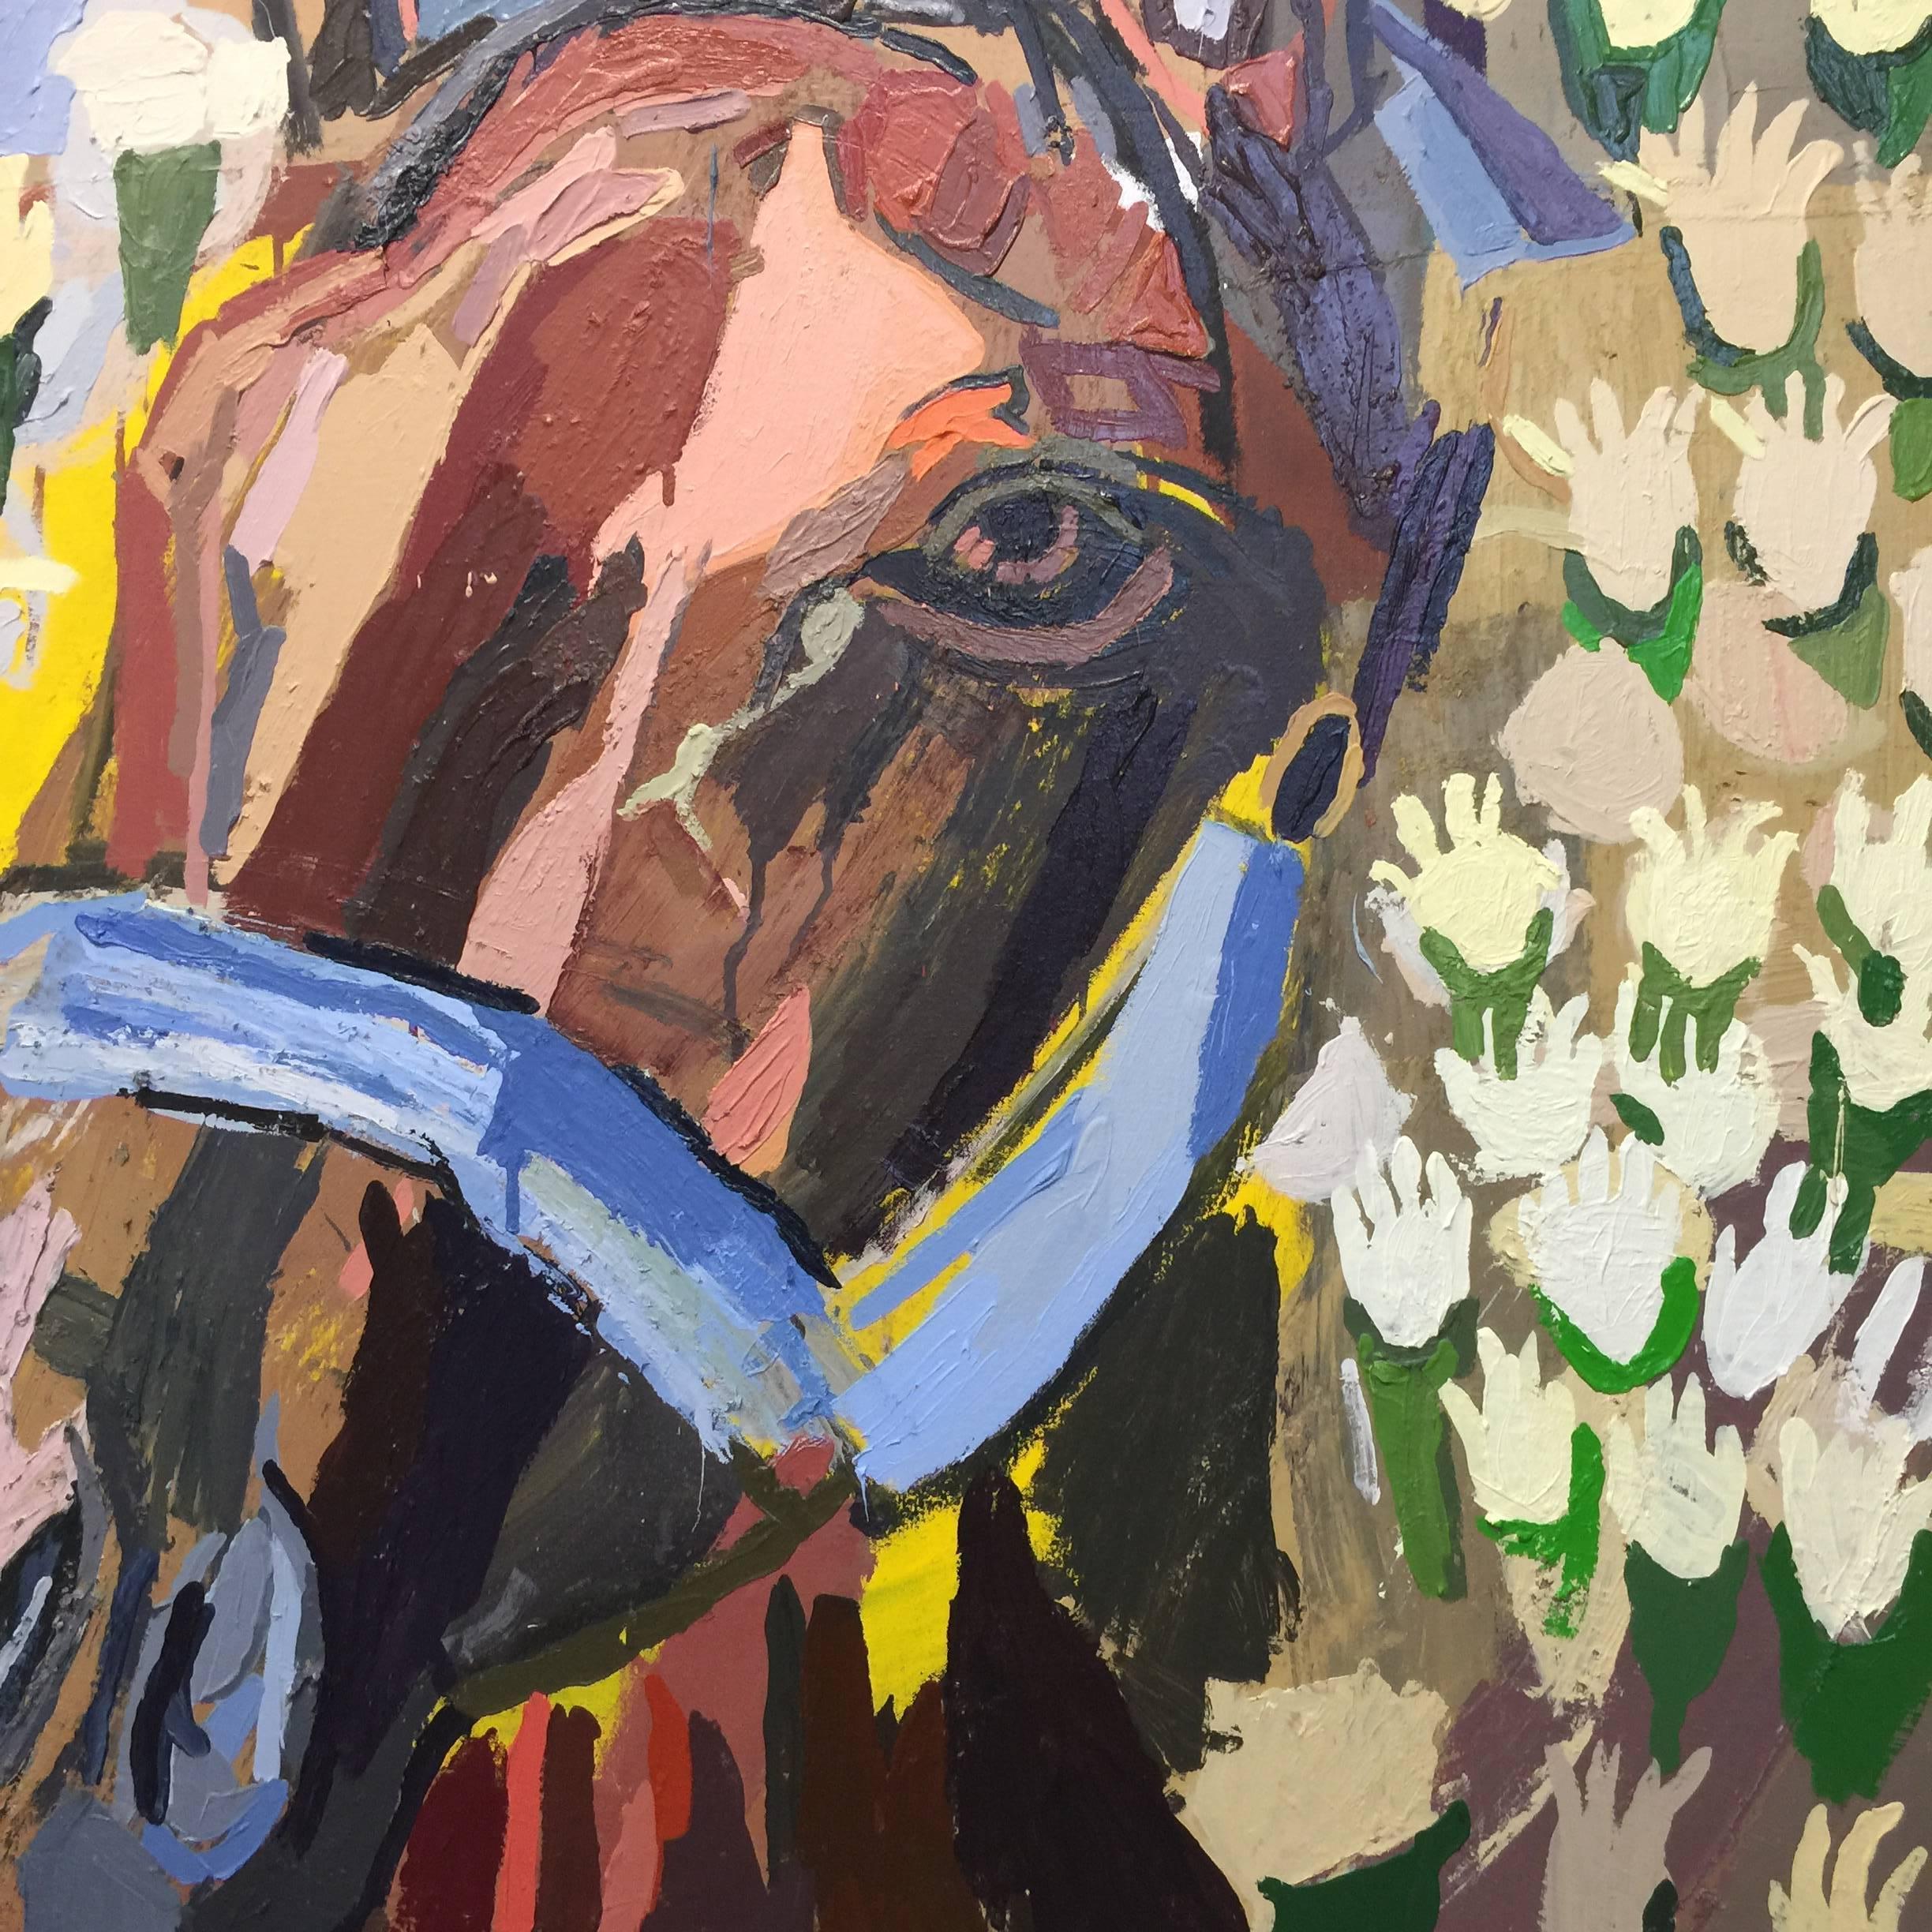 American Pharoah Oil Painting by New York City Artist Clintel Steed, 2015 For Sale 4